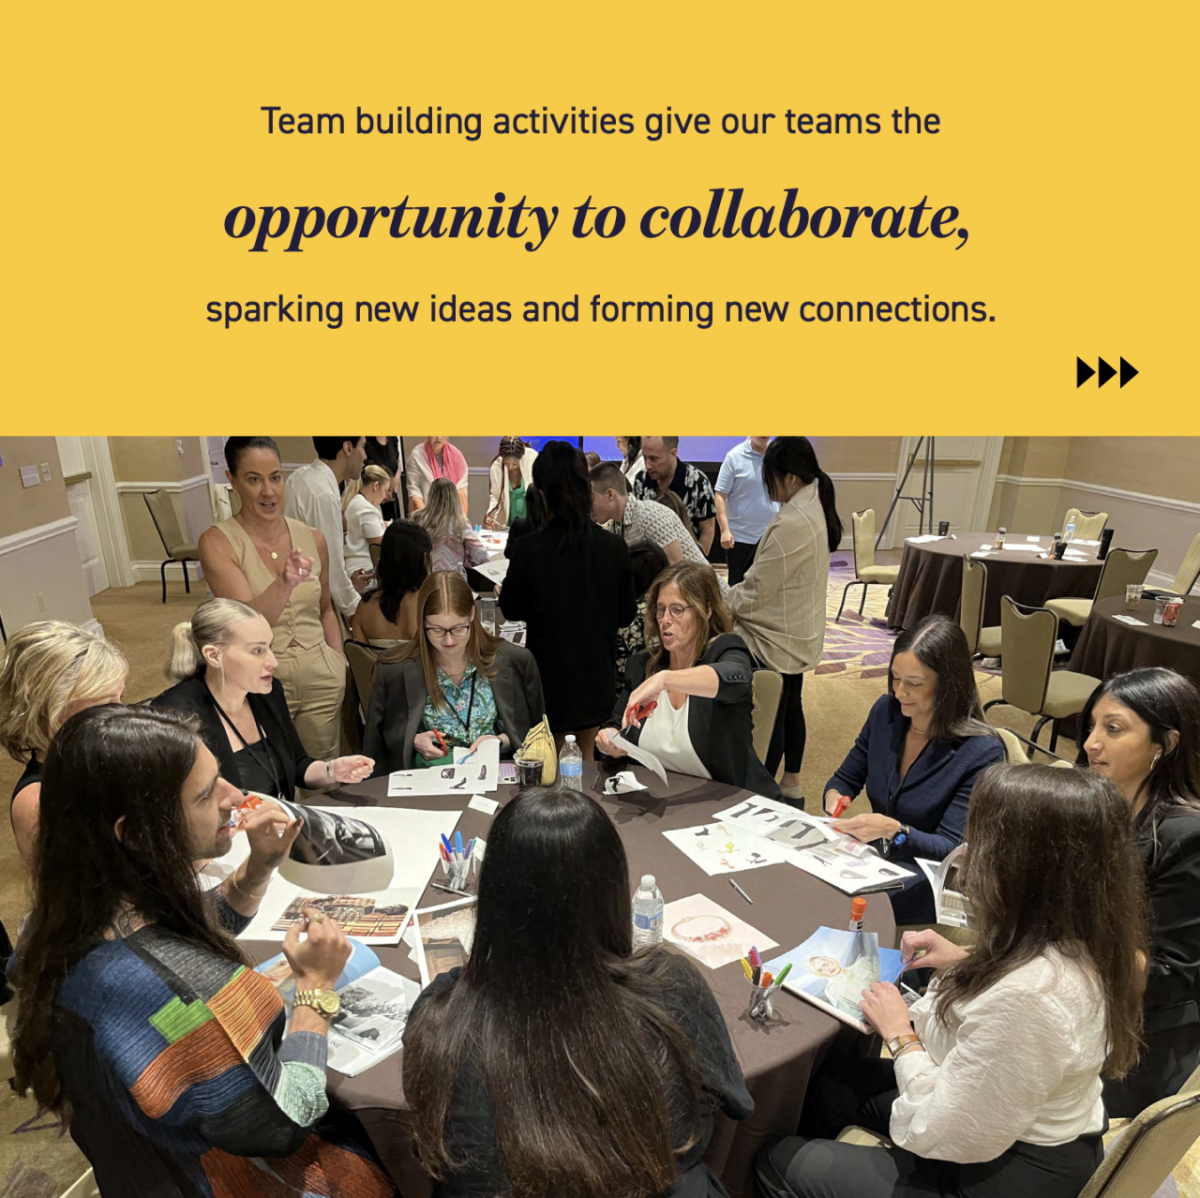 "Team building activities give our teams the opportunity to collaborate, sparking new ideas and forming new connections."